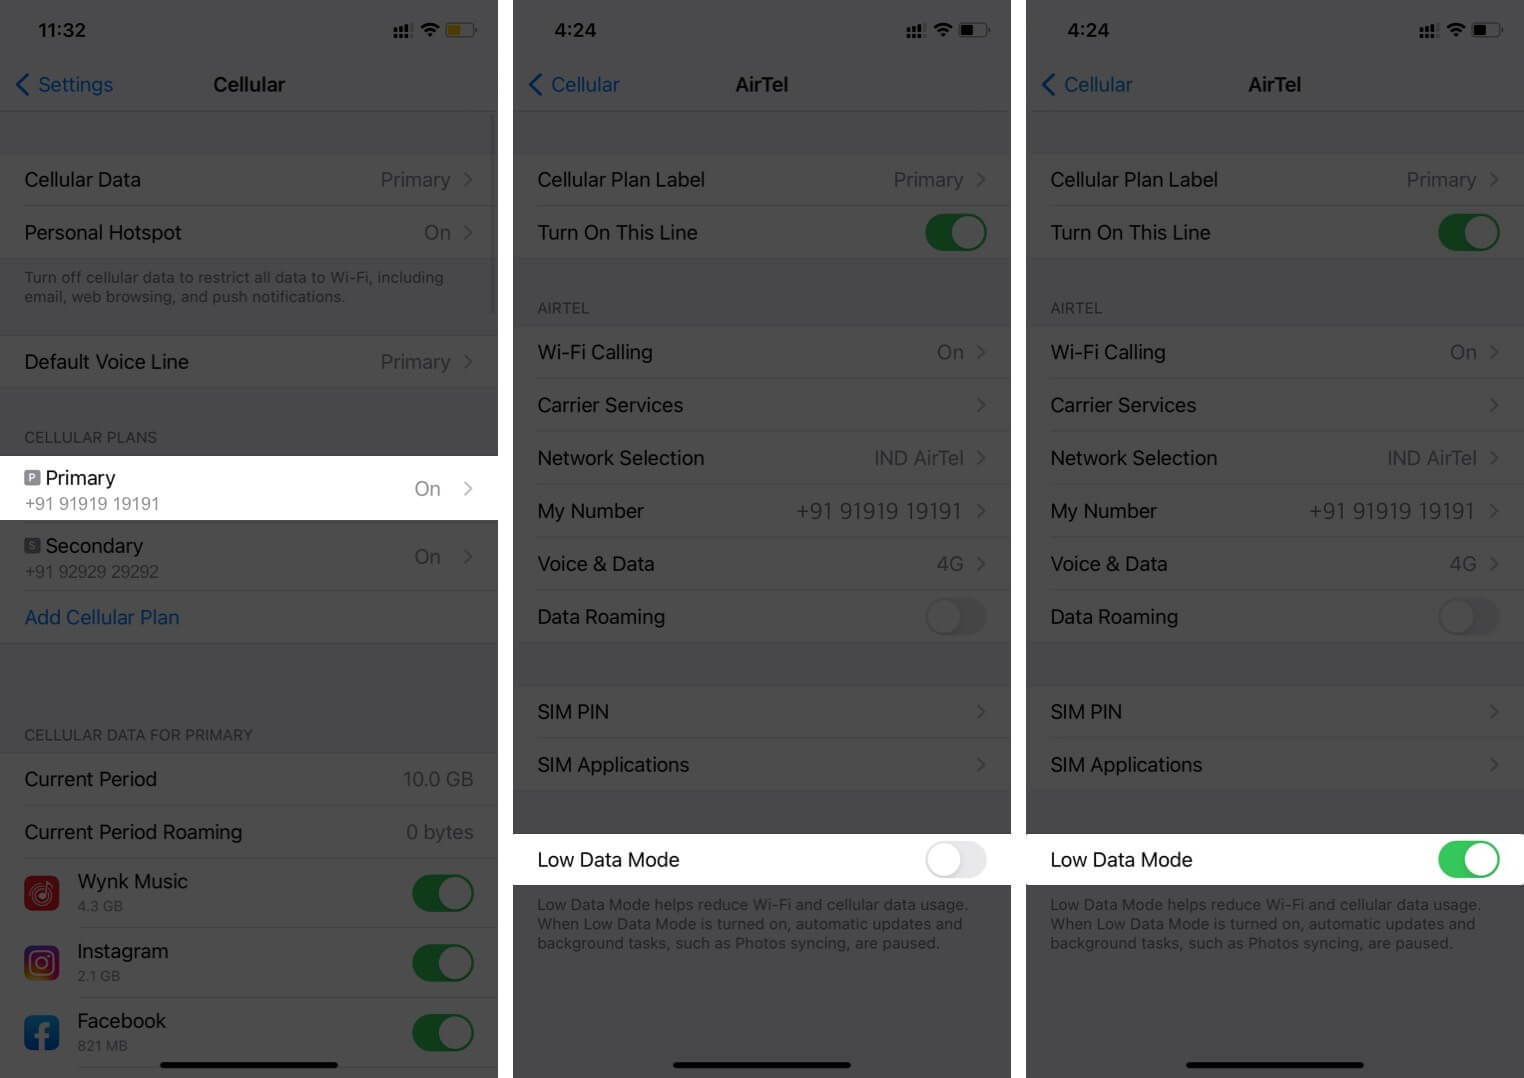 Enable Low Data Mode for Cellular Data on iPhone with Two Sim Cards